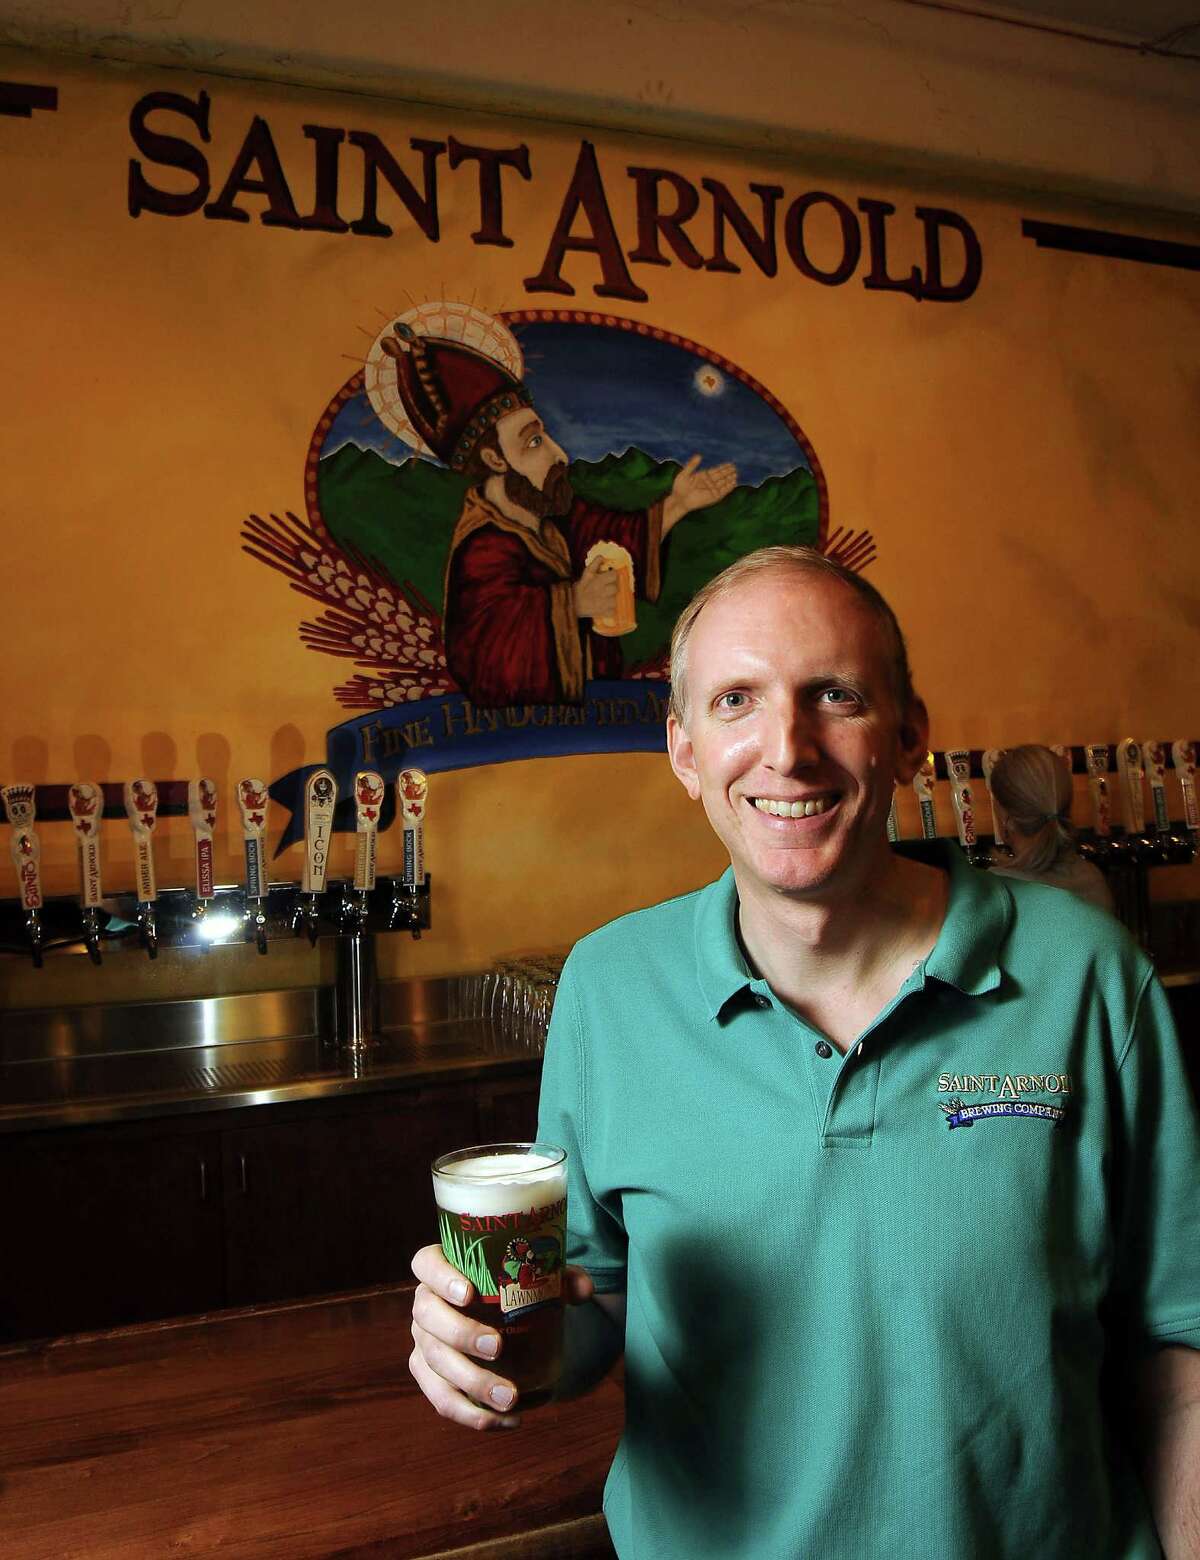 St. Arnold's Brock Wagner: "A great moment for craft brewers in Texas."